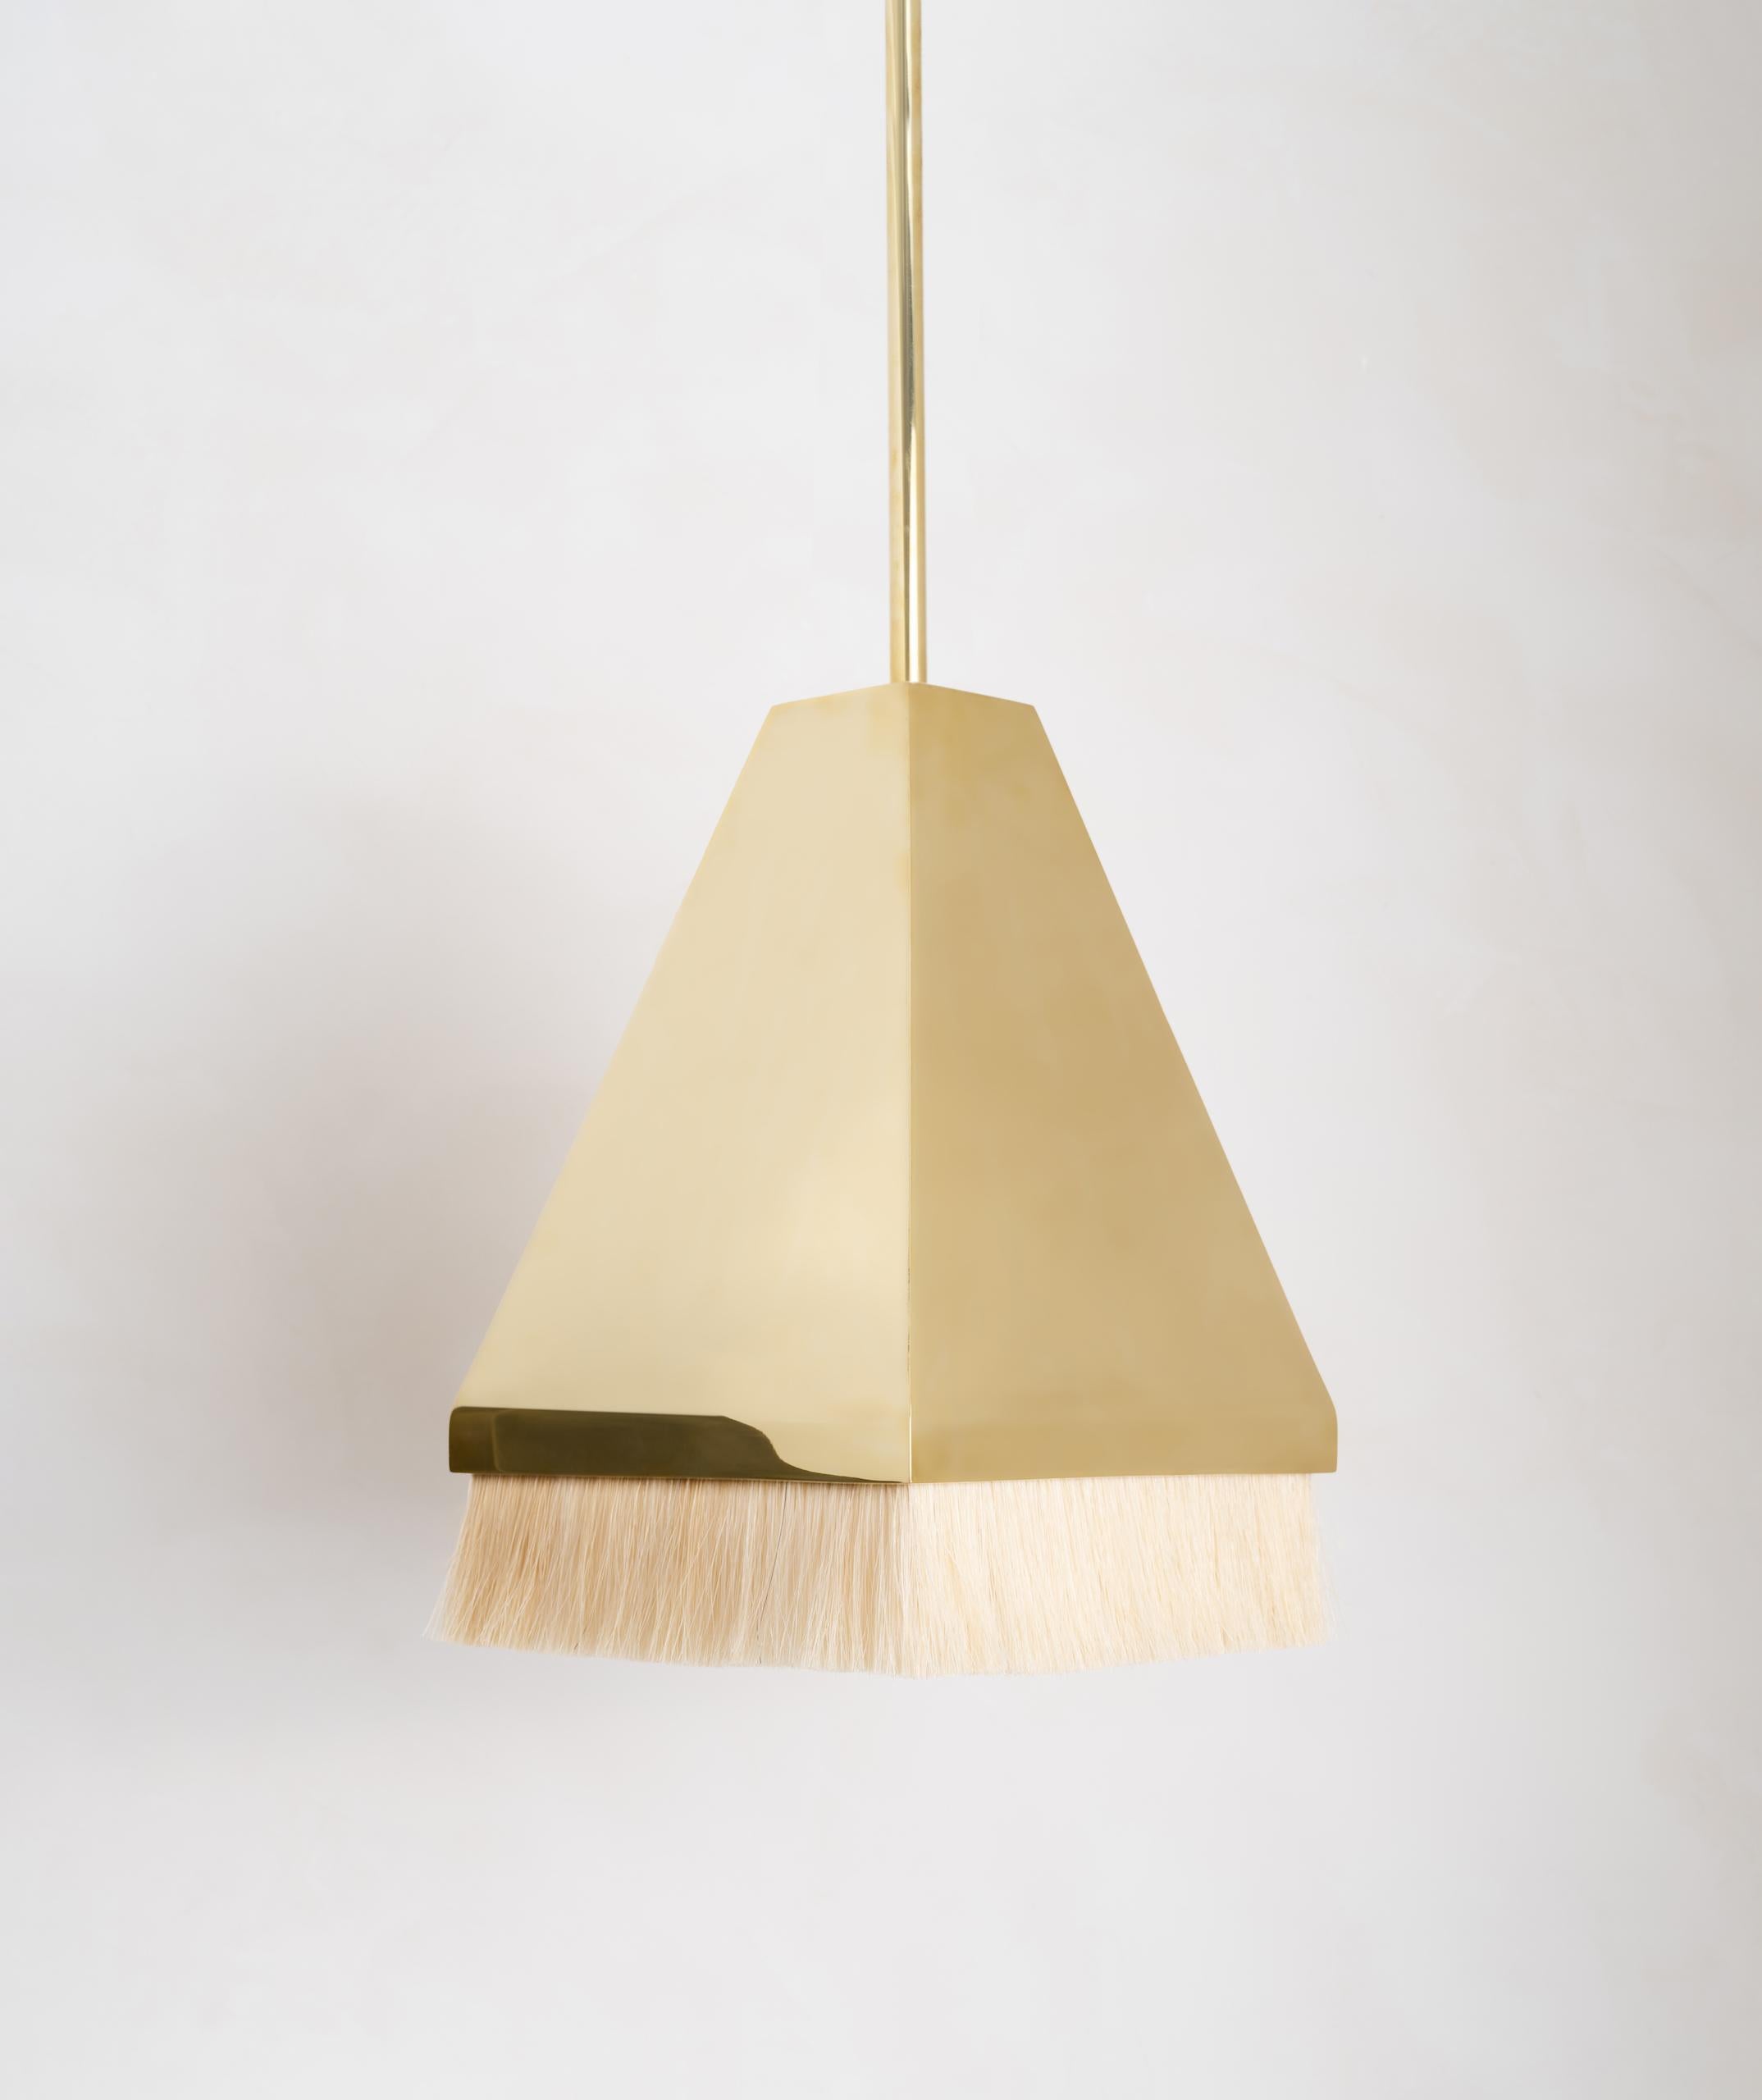 The Equus Pyramid Pendant features meticulously welded, hand-finished brass with a horse hair trim. Available in two sizes, the pendants showcase a complimentary balance between contrasting textures. Down light gives the horse hair an ethereal